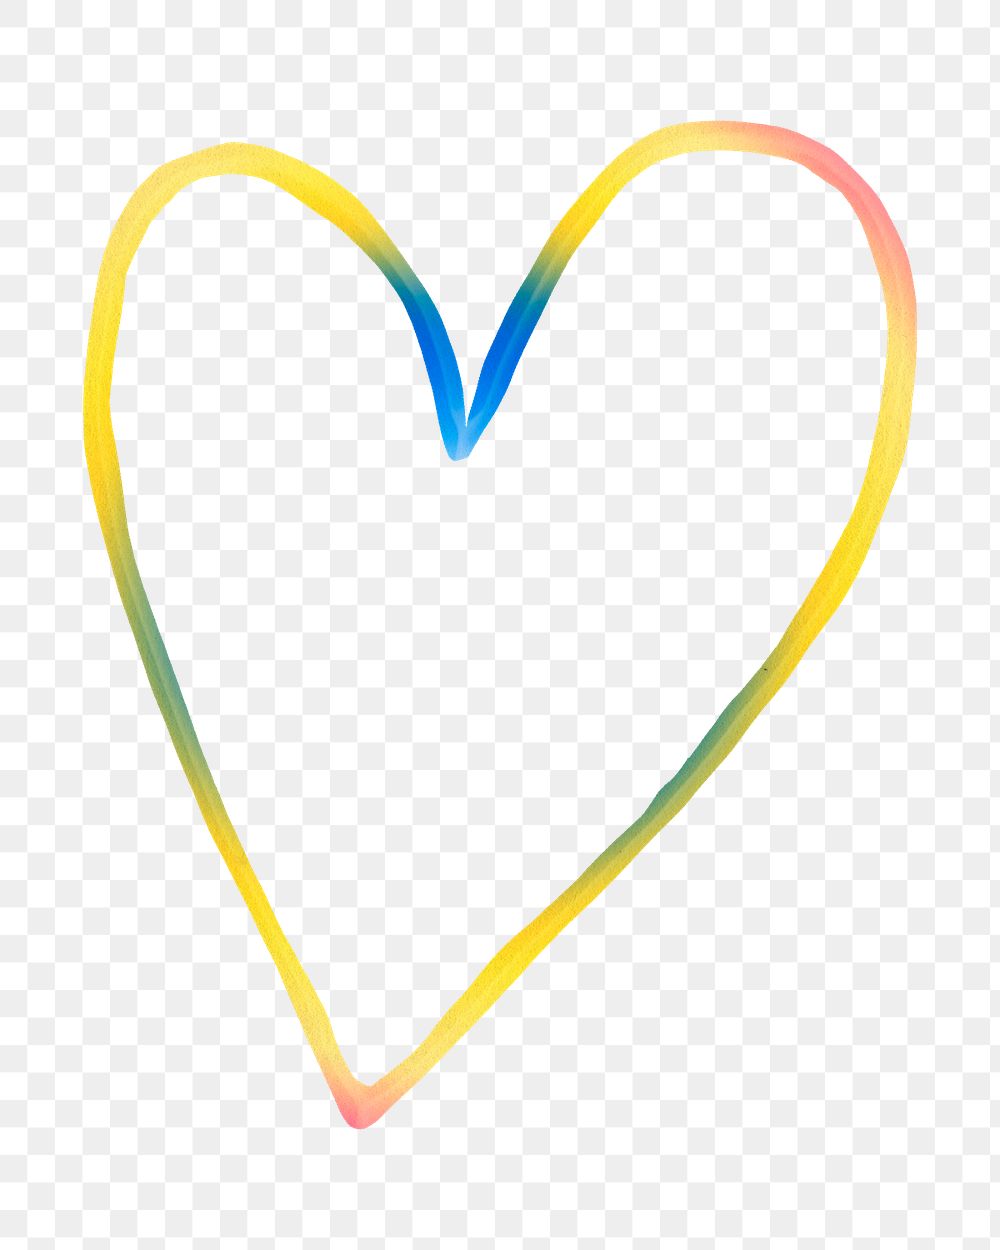 Heart png sticker in colorful color